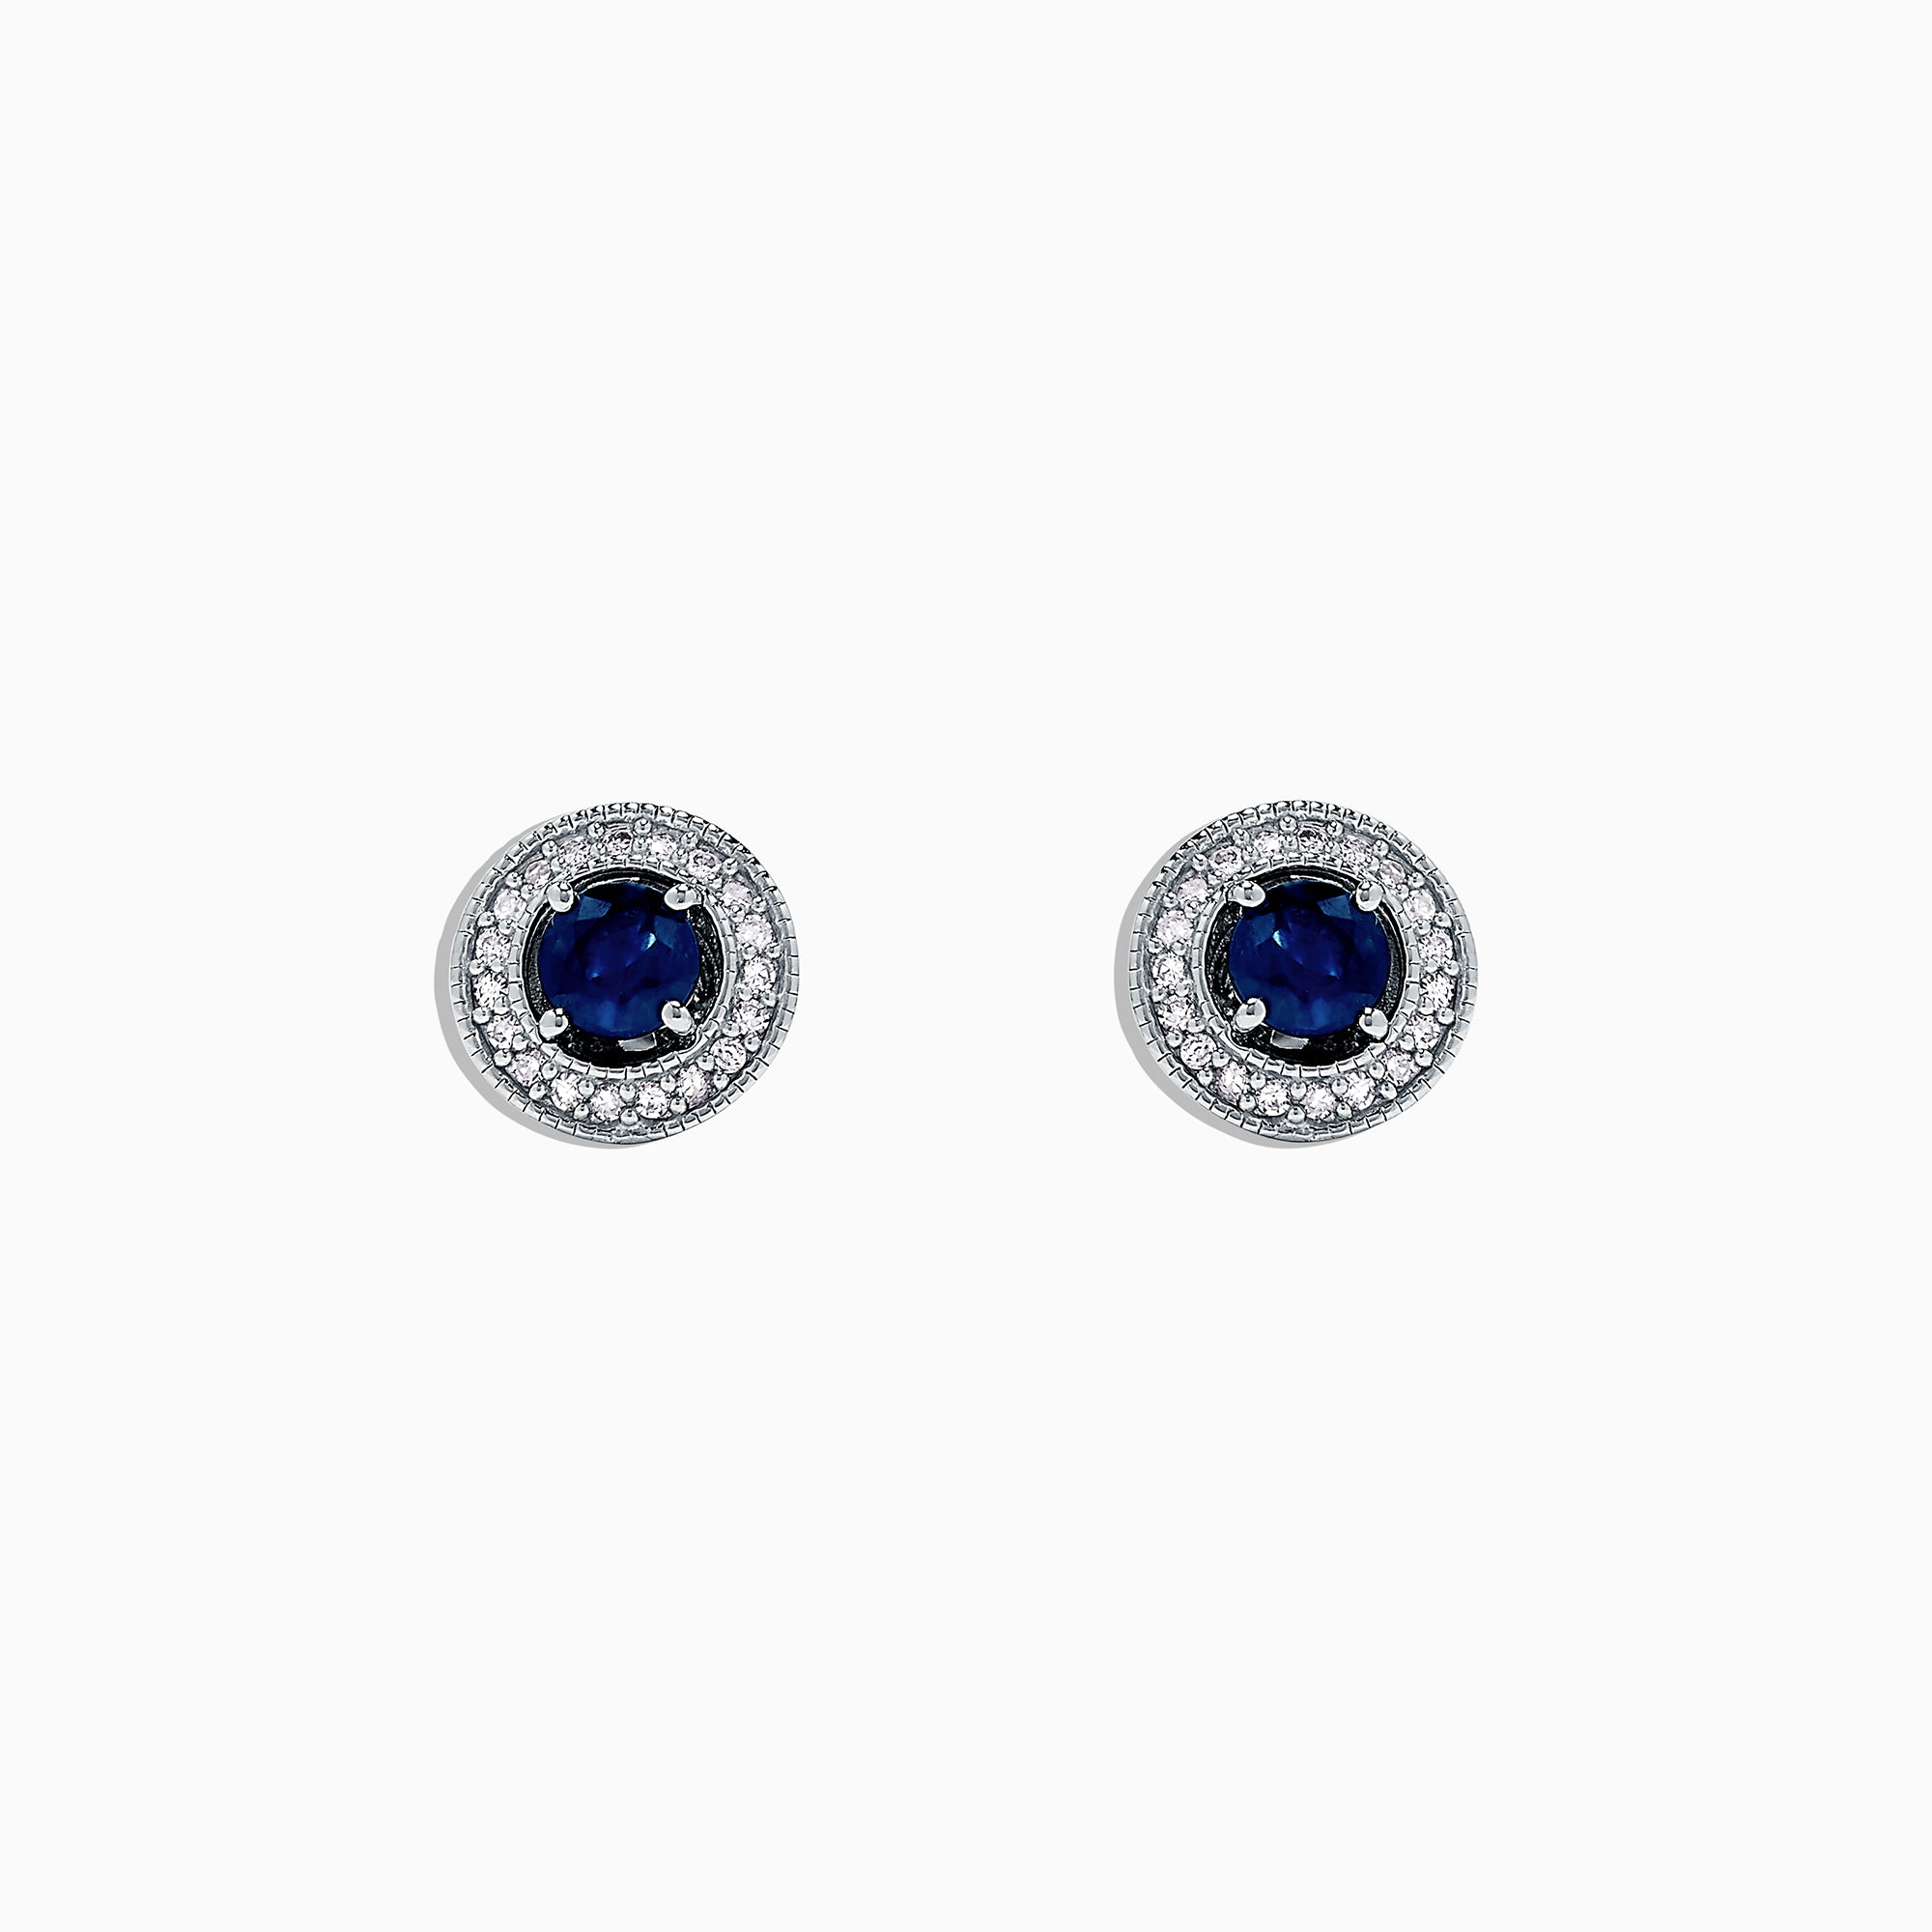 Effy 925 Sterling Silver Sapphire and Diamond Earrings, 0.80 TCW